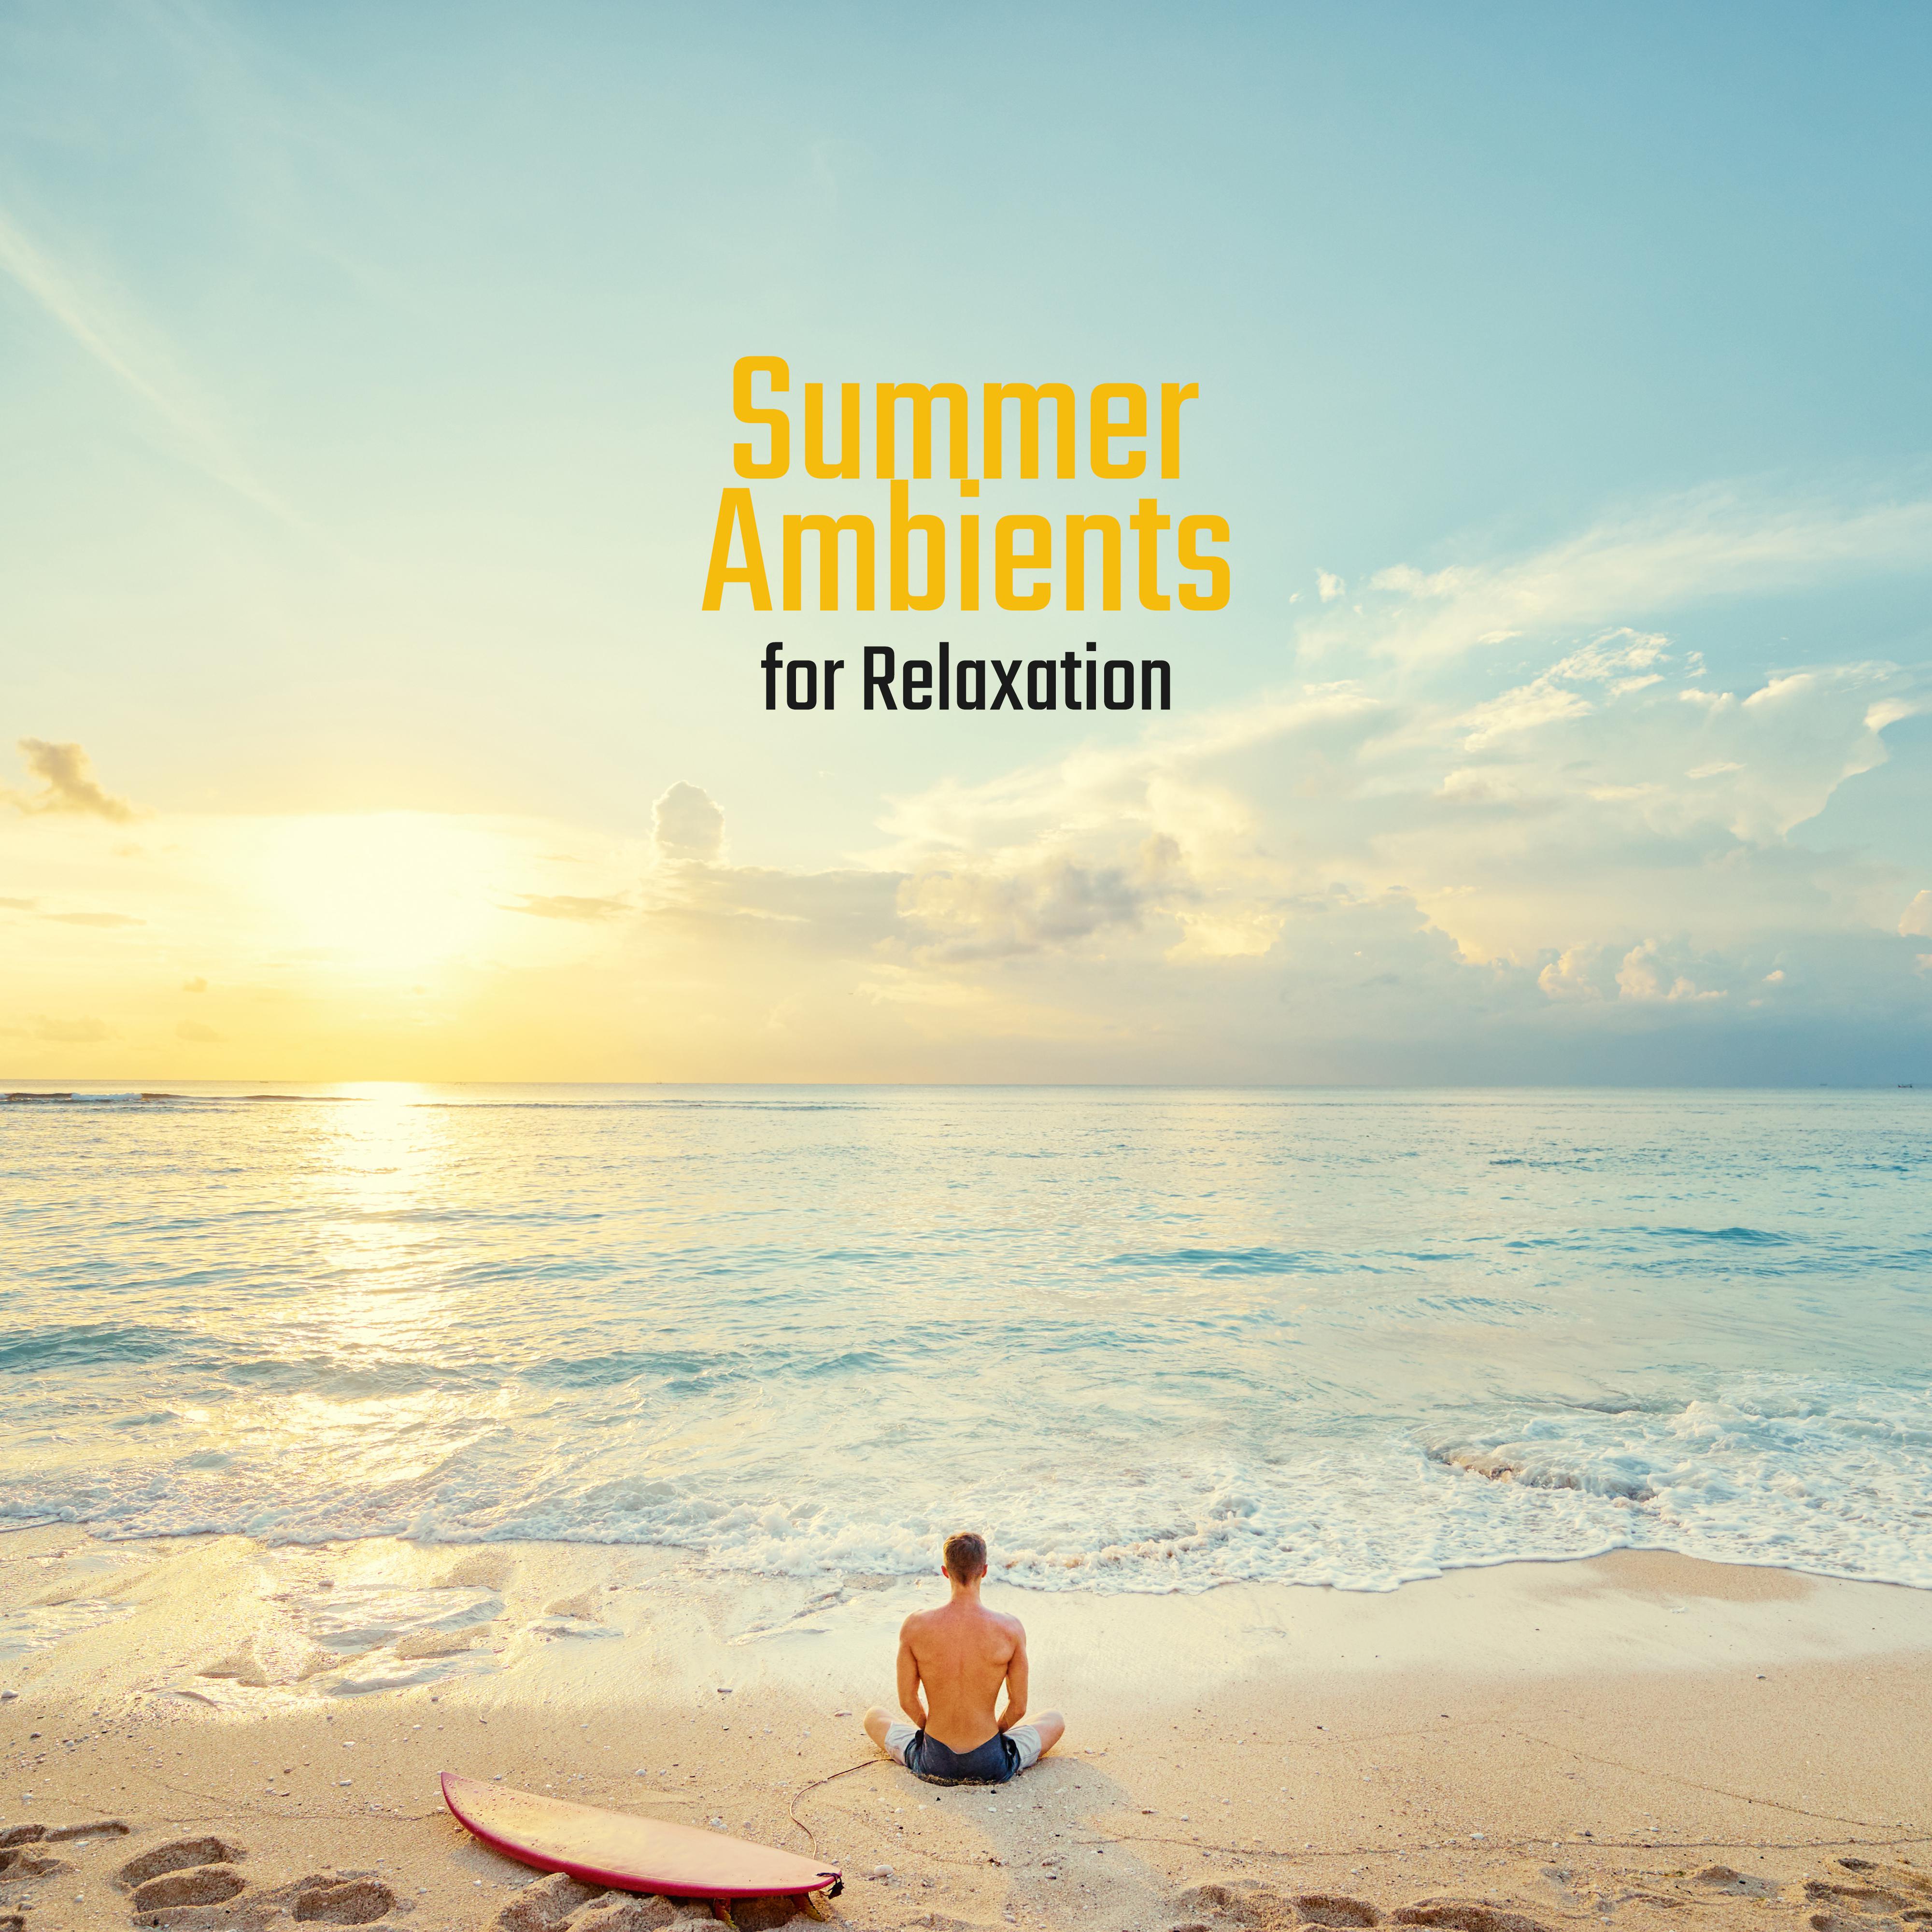 Summer Ambients for Relaxation – Chillout Music Soft Rhythms for Calming Down, Stress Relief, Relax on the Beach